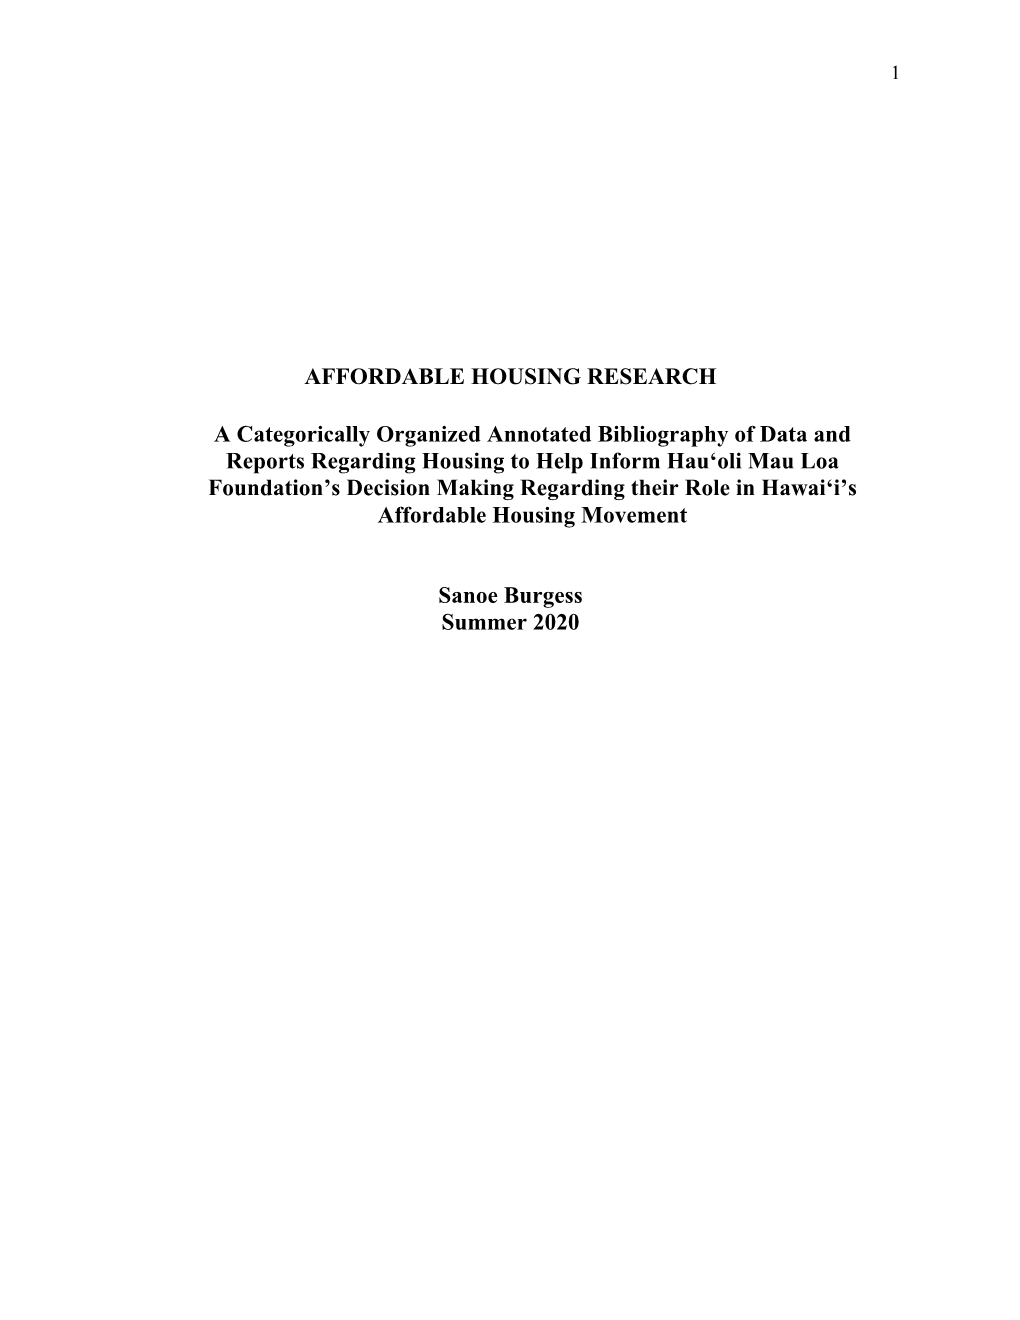 Annotated Bibliography of Data and Reports Regarding Housing